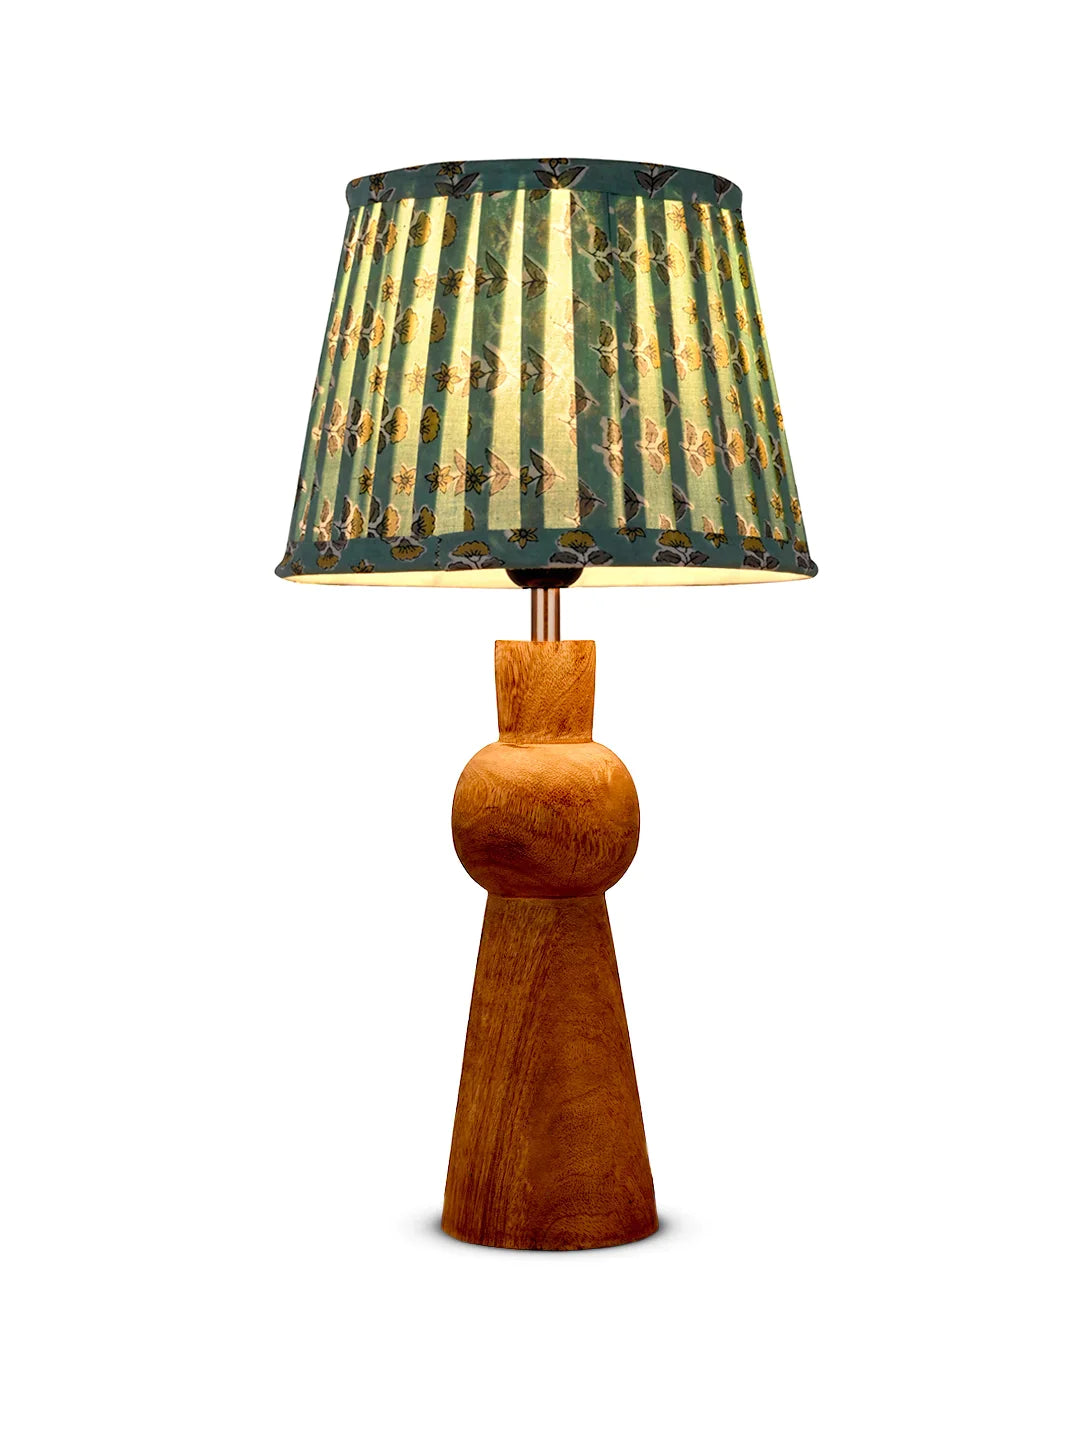 Wooden Skirt Table Lamp with Pleeted Colorful Turquoise Taper Shade